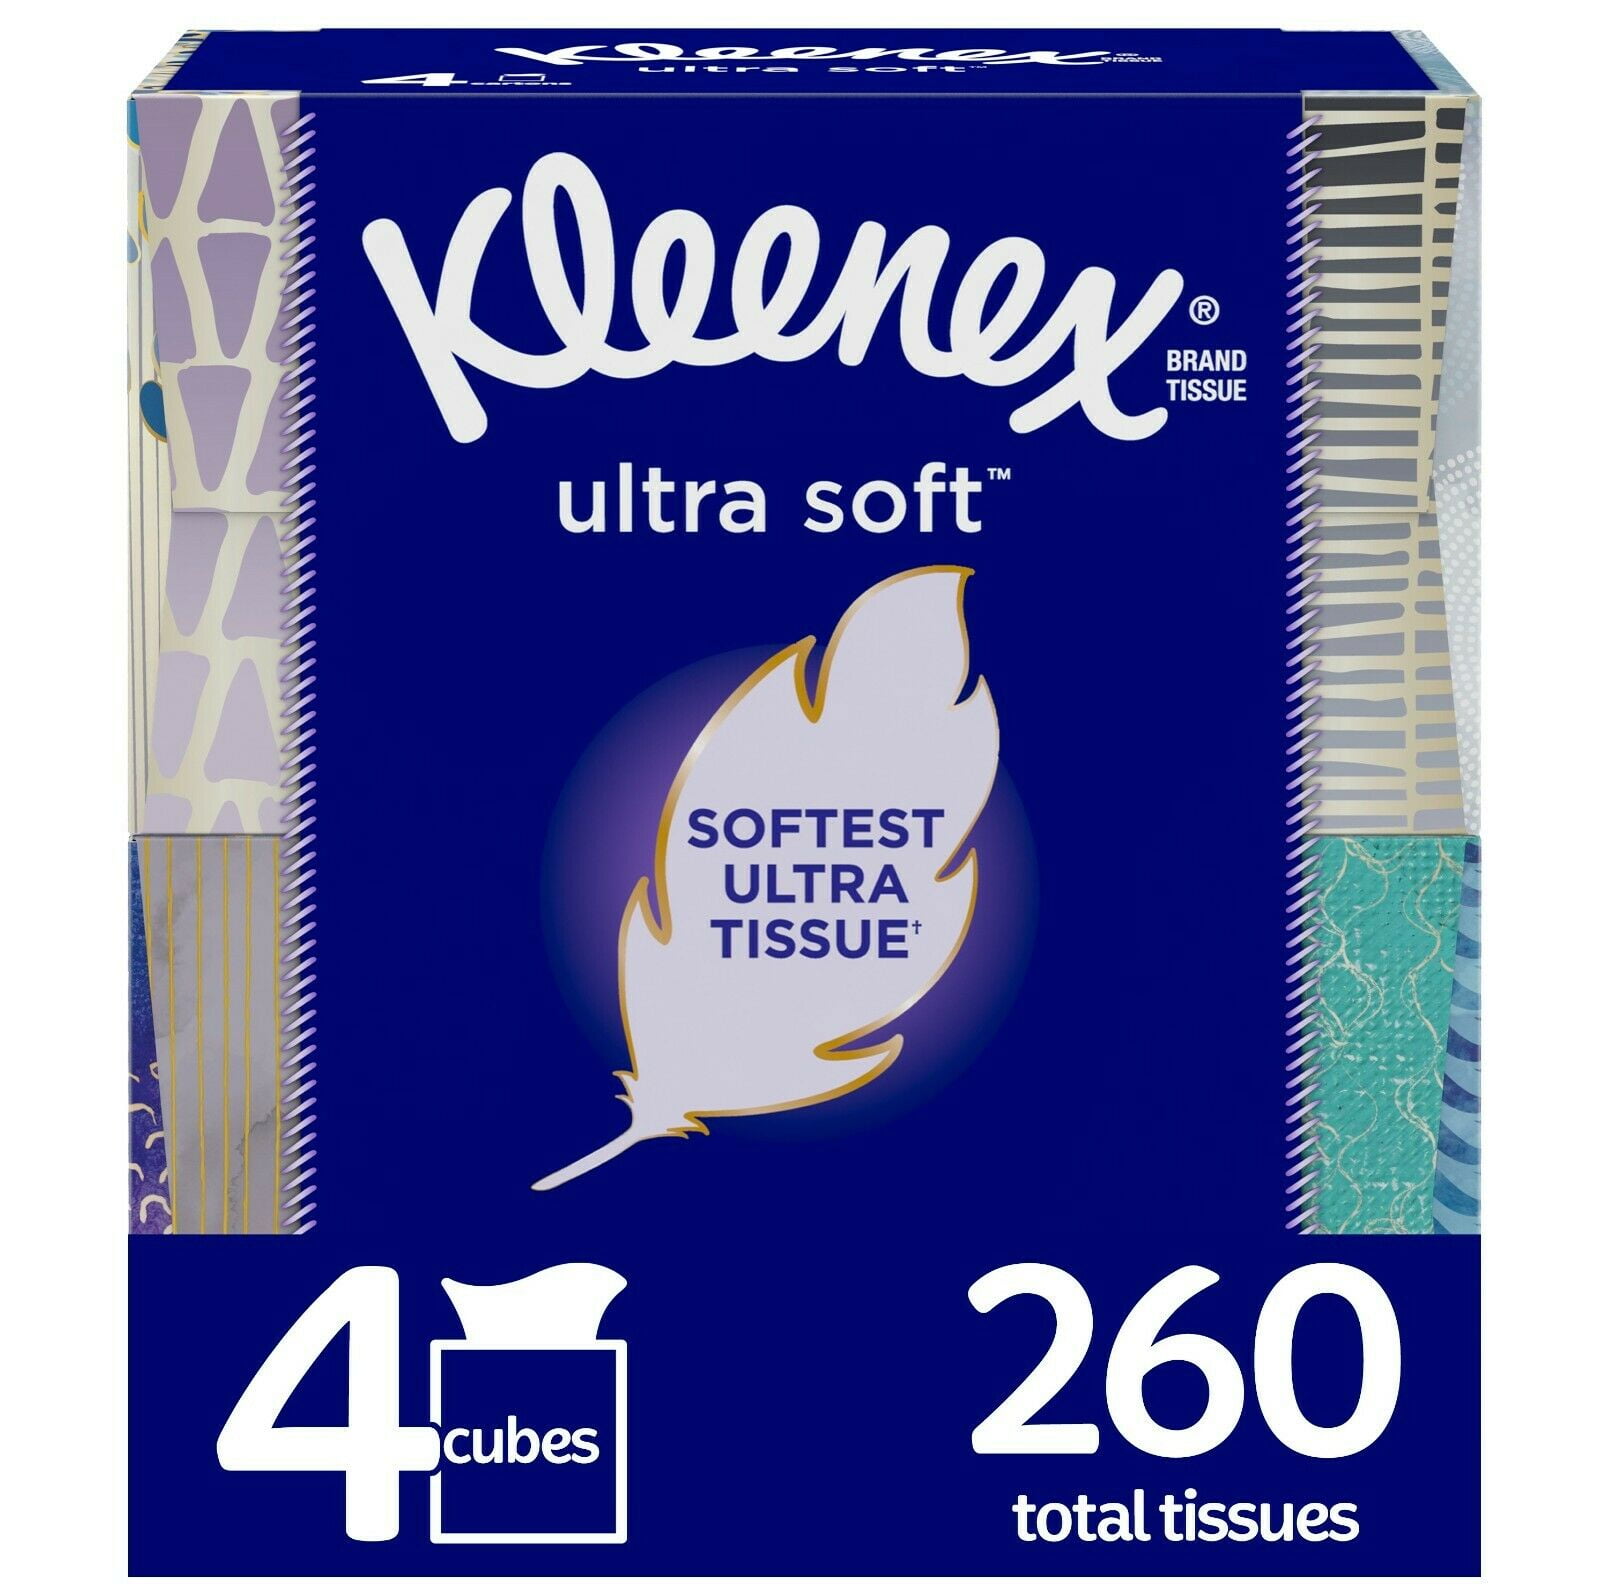 12 pack Kleenex Ultra Soft Facial Tissues Cube boxes 65 tissues per pack 